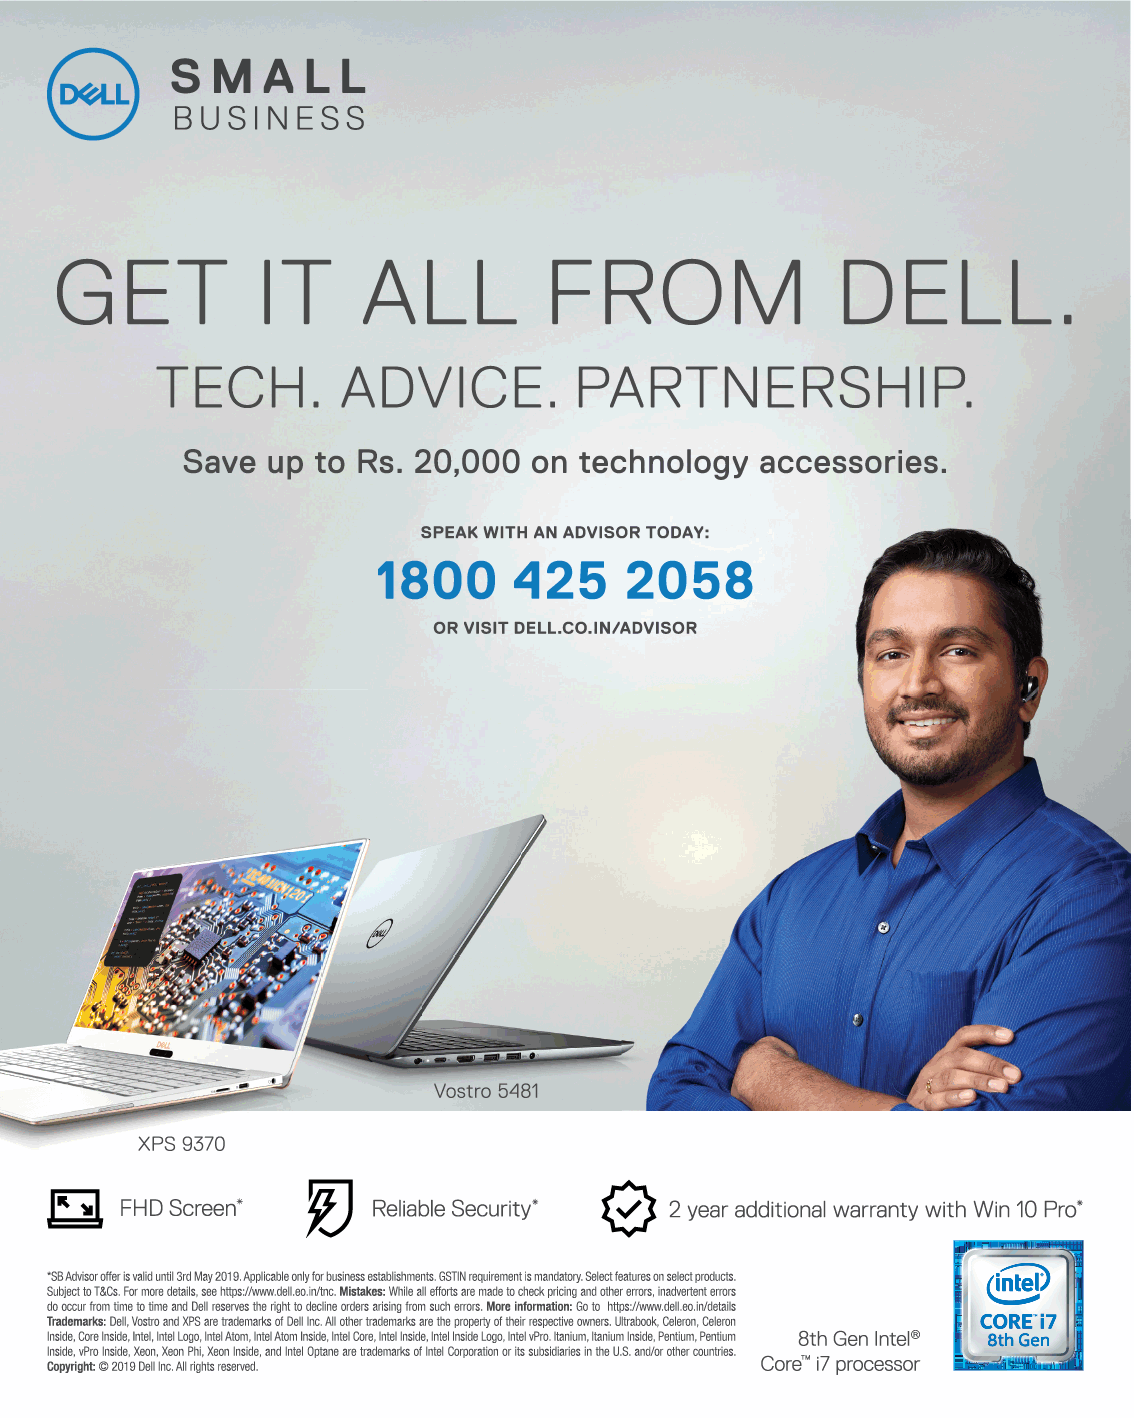 dell-laptops-small-business-save-upto-rs-20000-on-technology-accessories-ad-bombay-times-10-04-2019.png